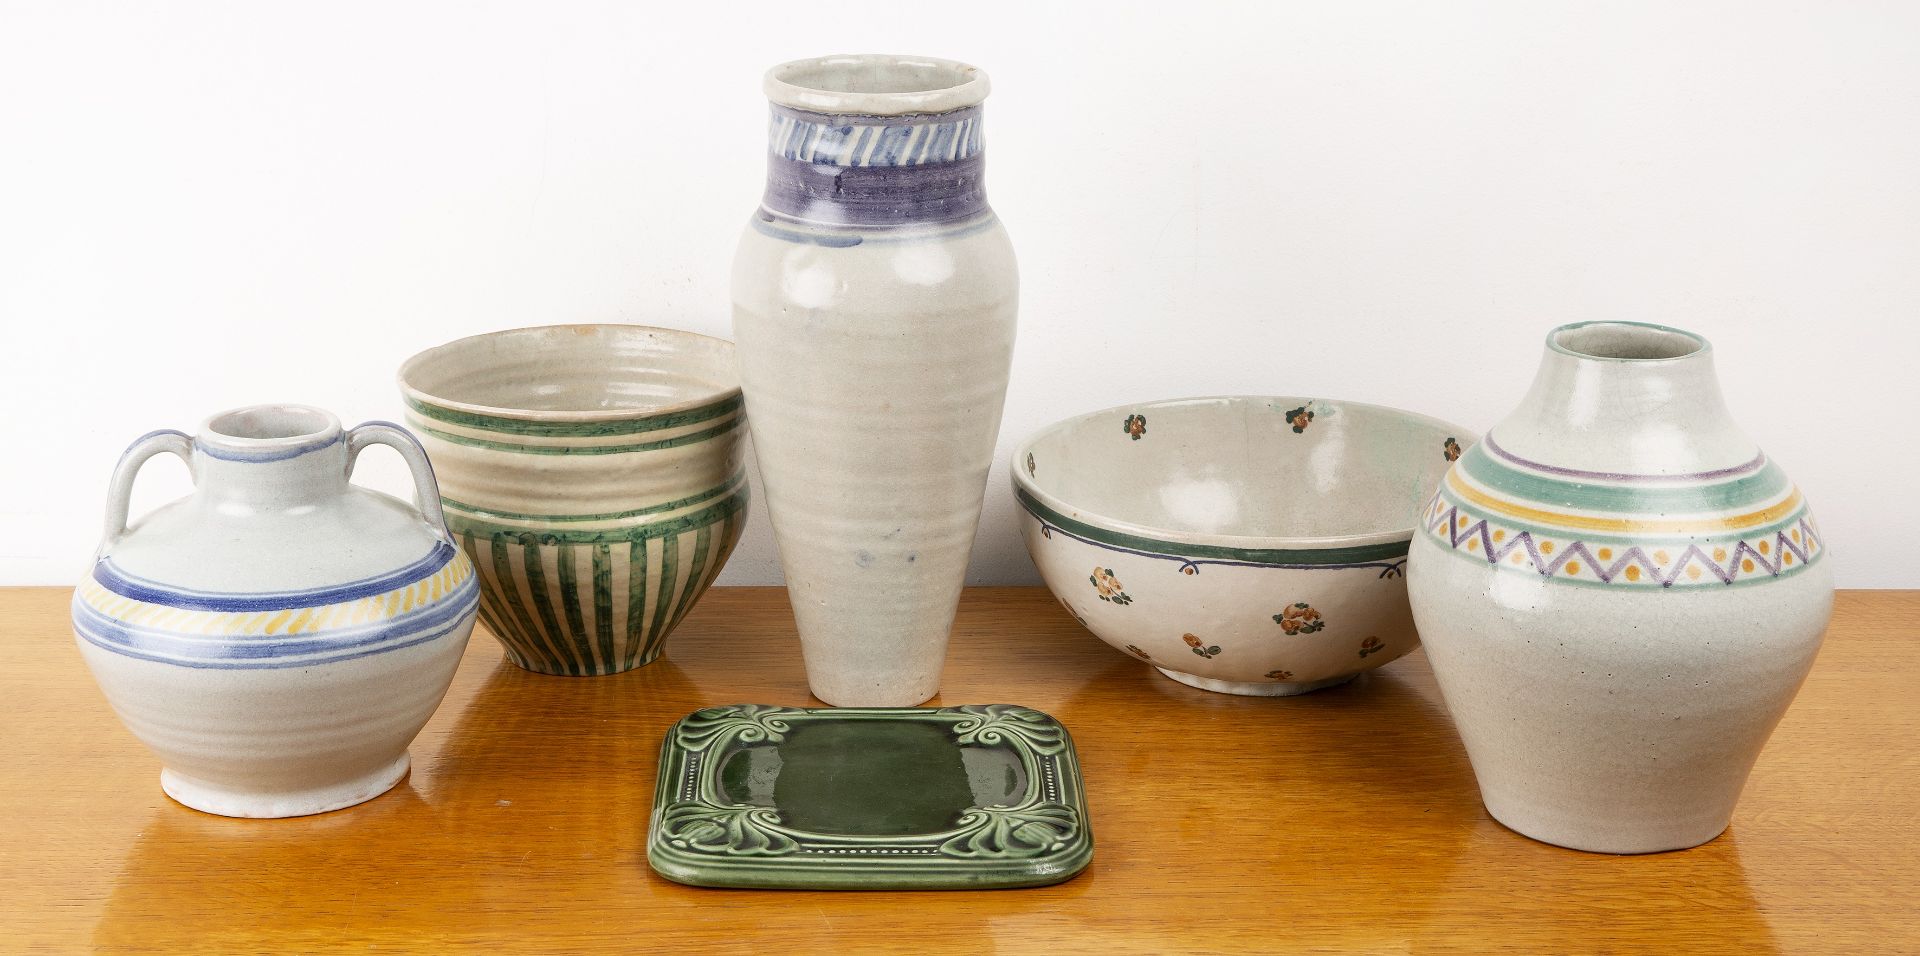 Carter & Co (Poole Pottery interest) and later pieces, including an early Carter & Co green glazed